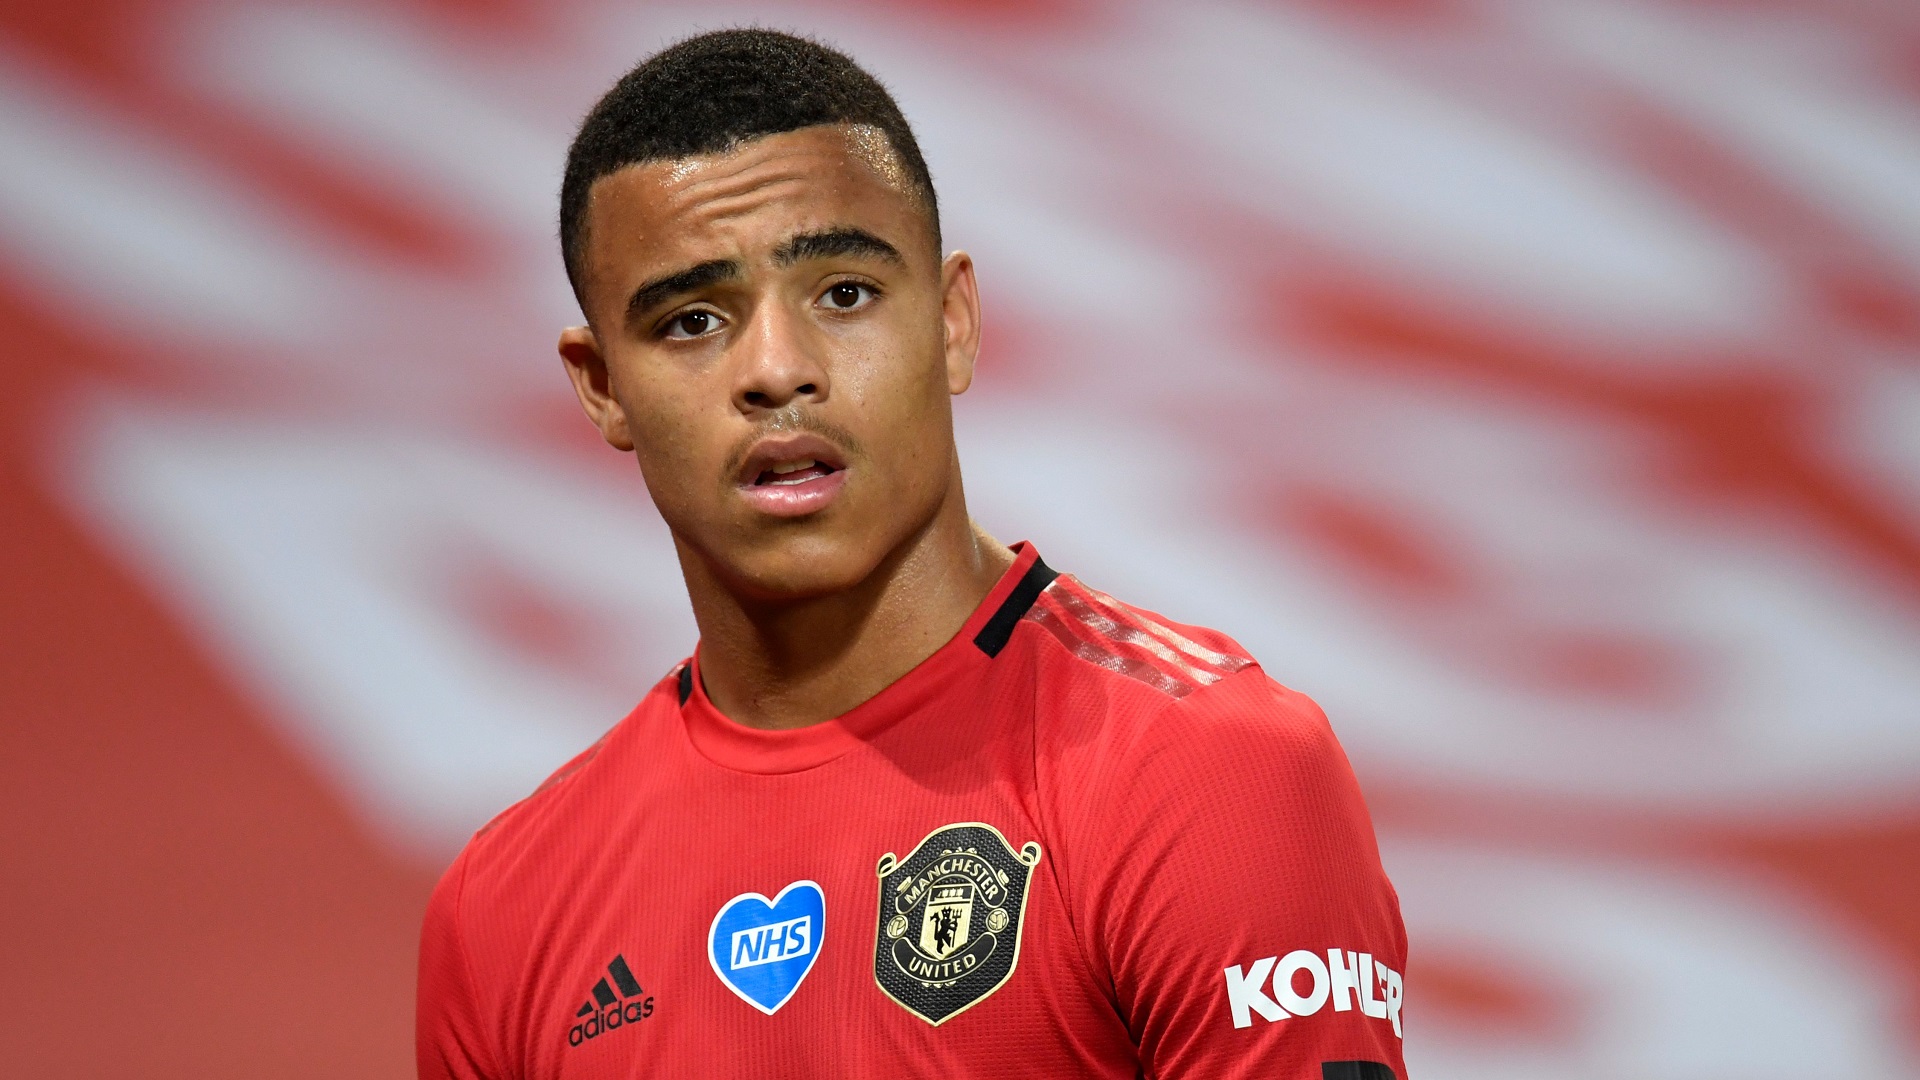 Man Utd star Greenwood issues apology after being sent home from England camp